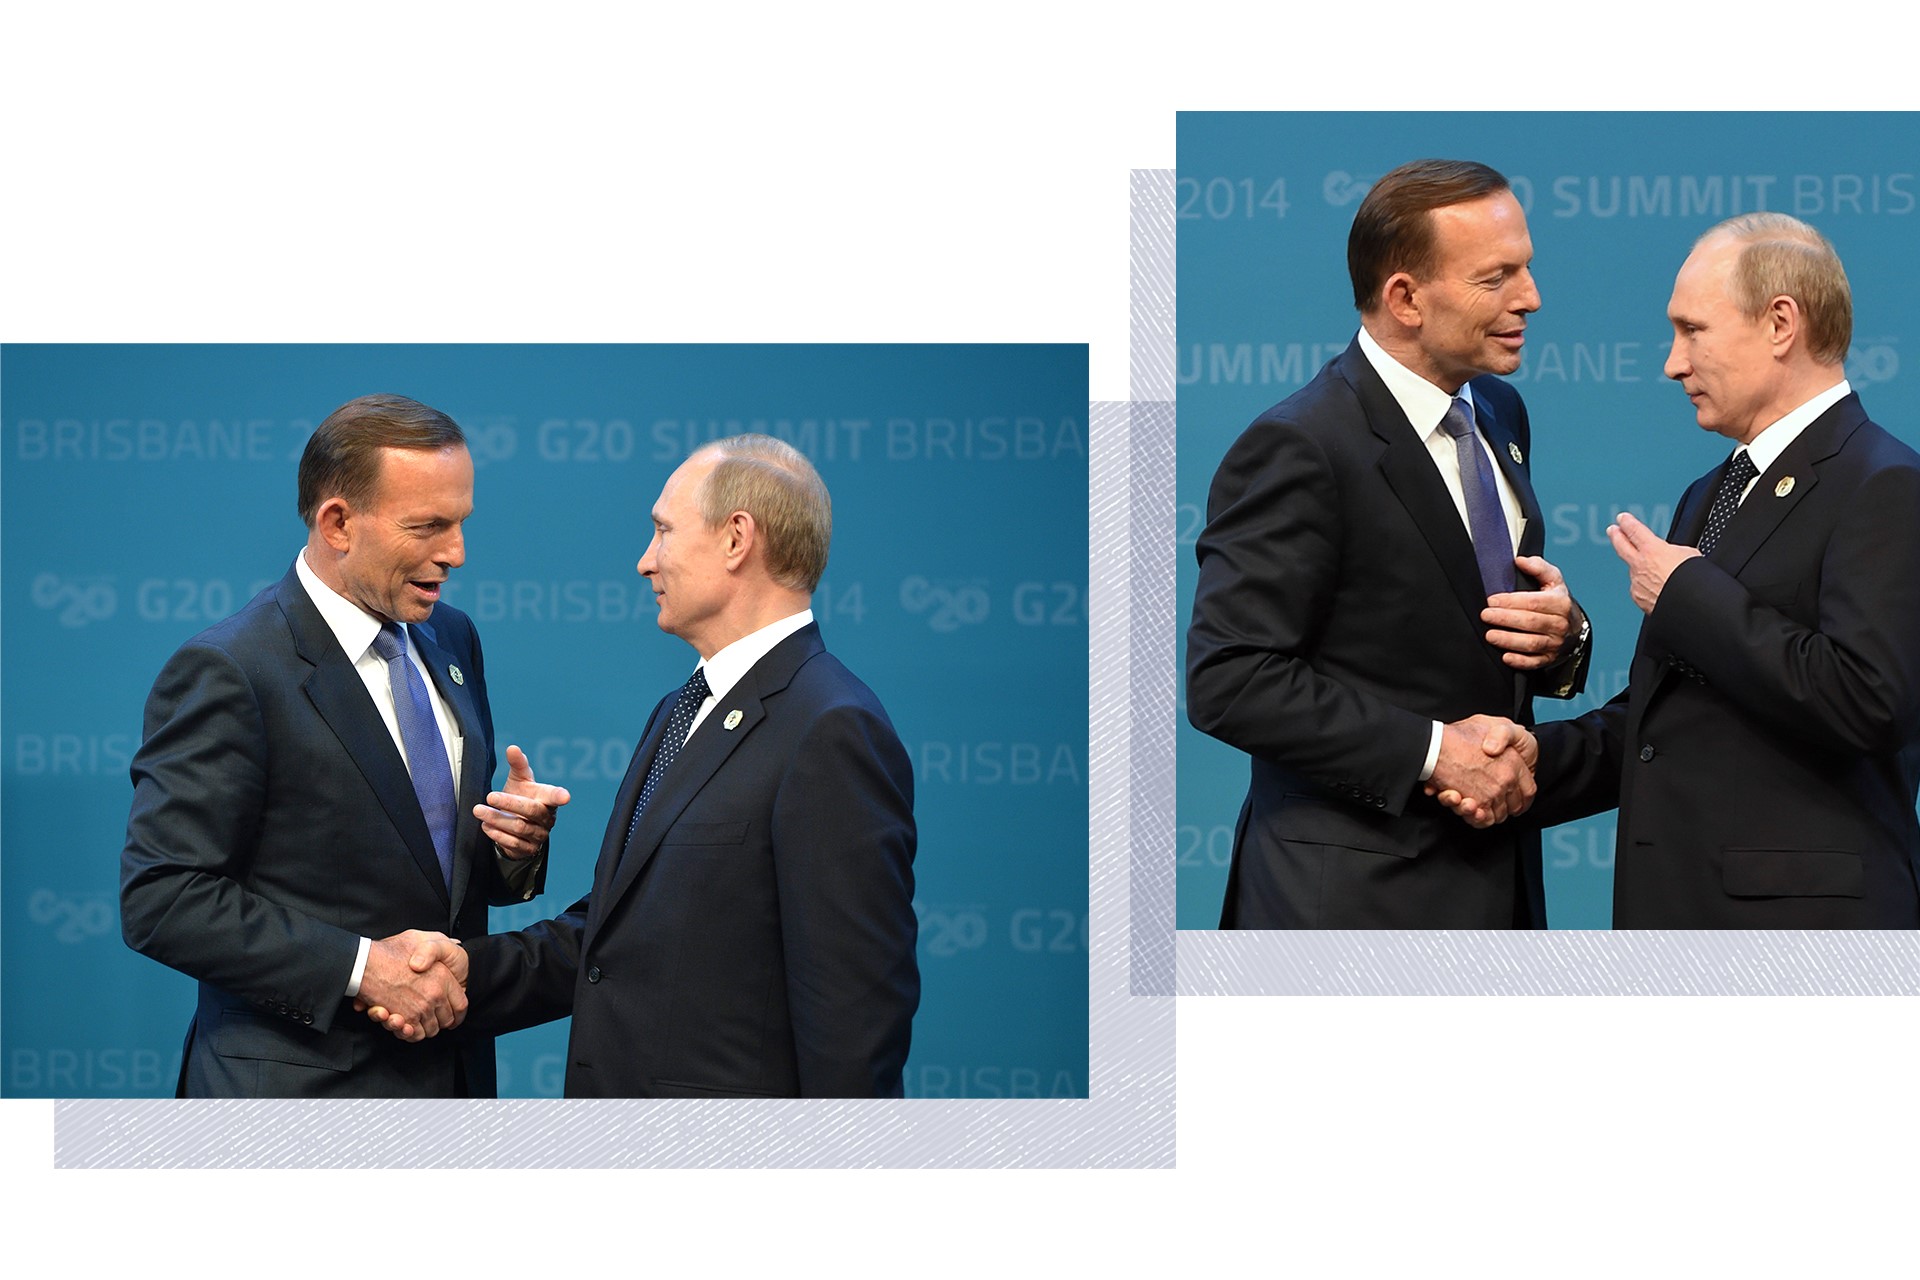 A composite of two images showing Tony Abbott shaking hands with Vladimir Putin at the G20 summit in Brisbane.